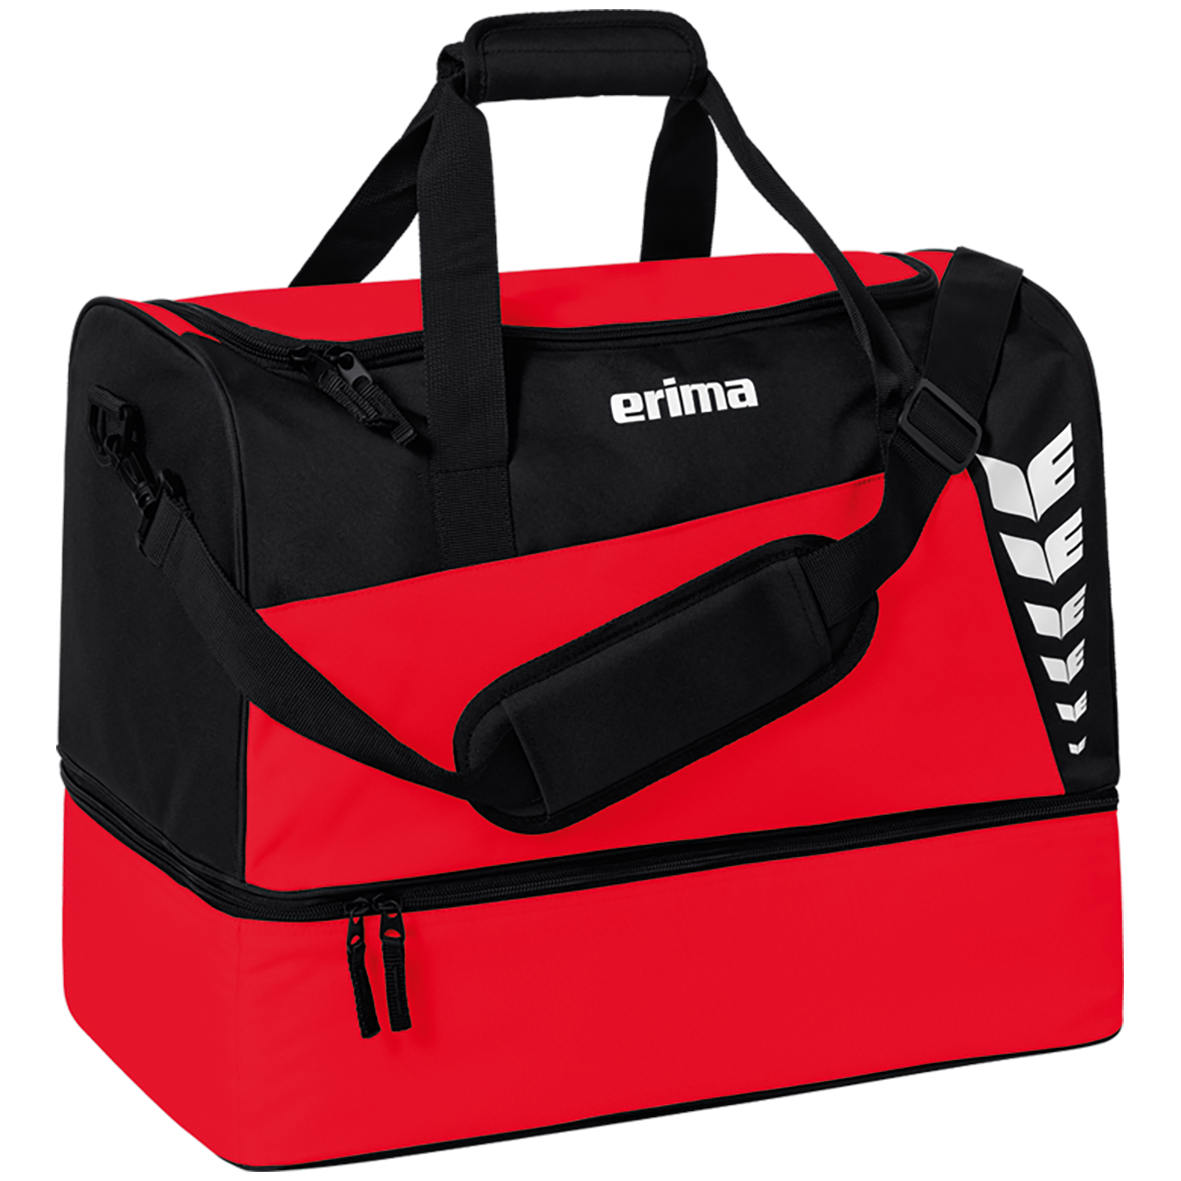 ERIMA SIX WINGS SPORTS BAG WITH BOTTOM COMPARTMENT, RED-BLACK.